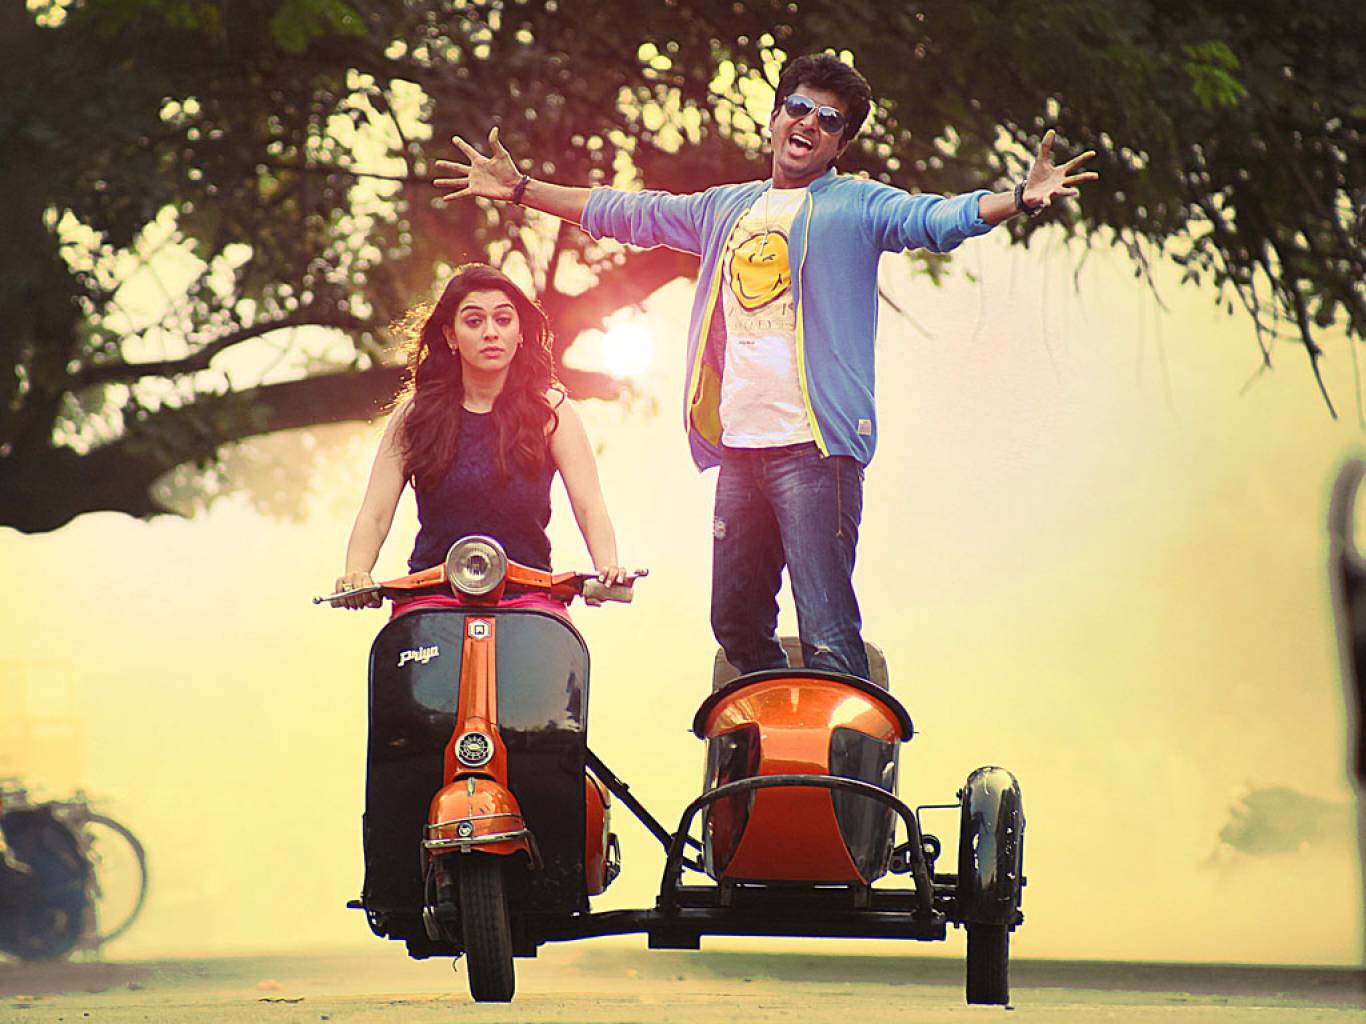 tamil movies hd wallpapers 1080p,vehicle,mode of transport,motor vehicle,bicycle,fun